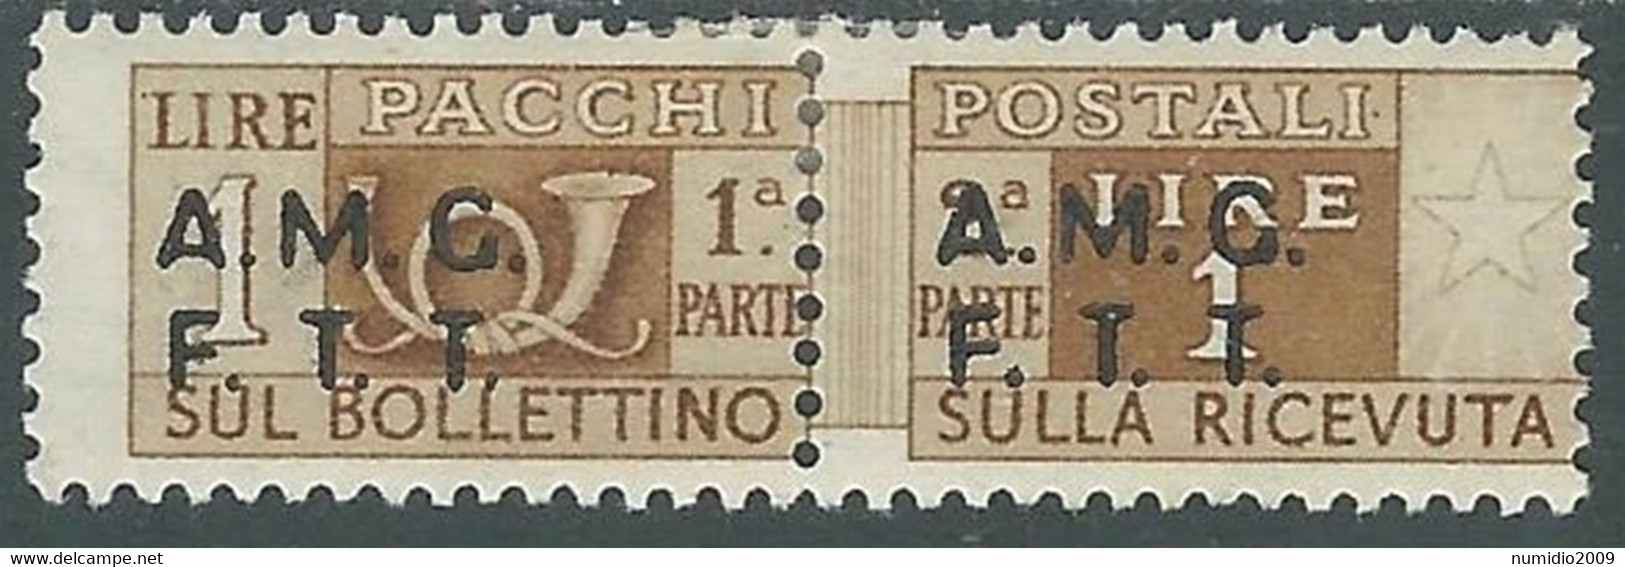 1947-48 TRIESTE A PACCHI POSTALI 1 LIRA MH * - CZ22-2 - Postal And Consigned Parcels